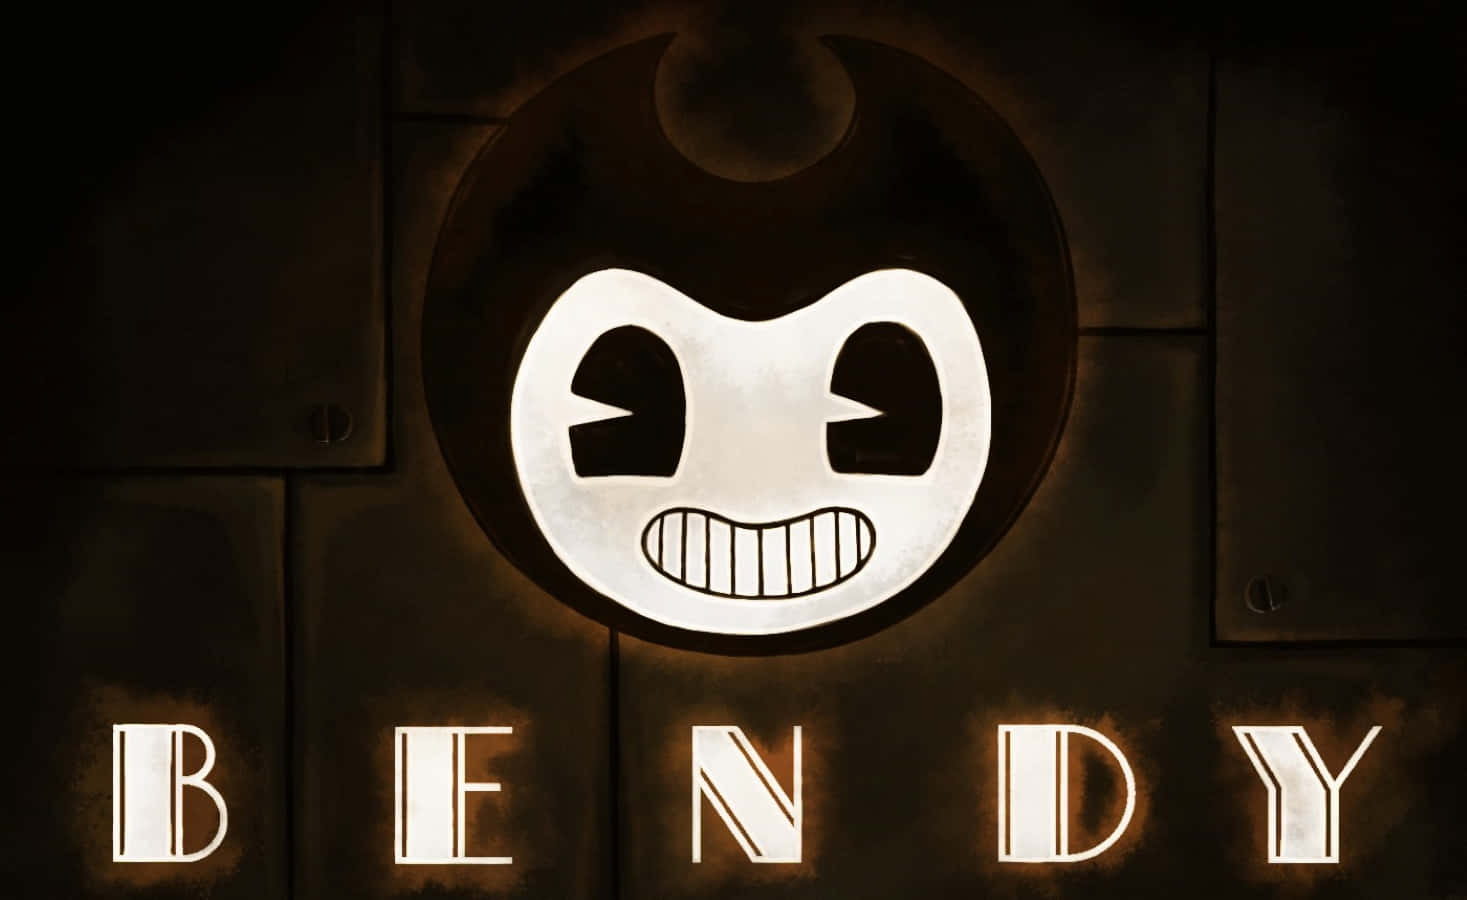 Bendy In A Dark, Mysterious World